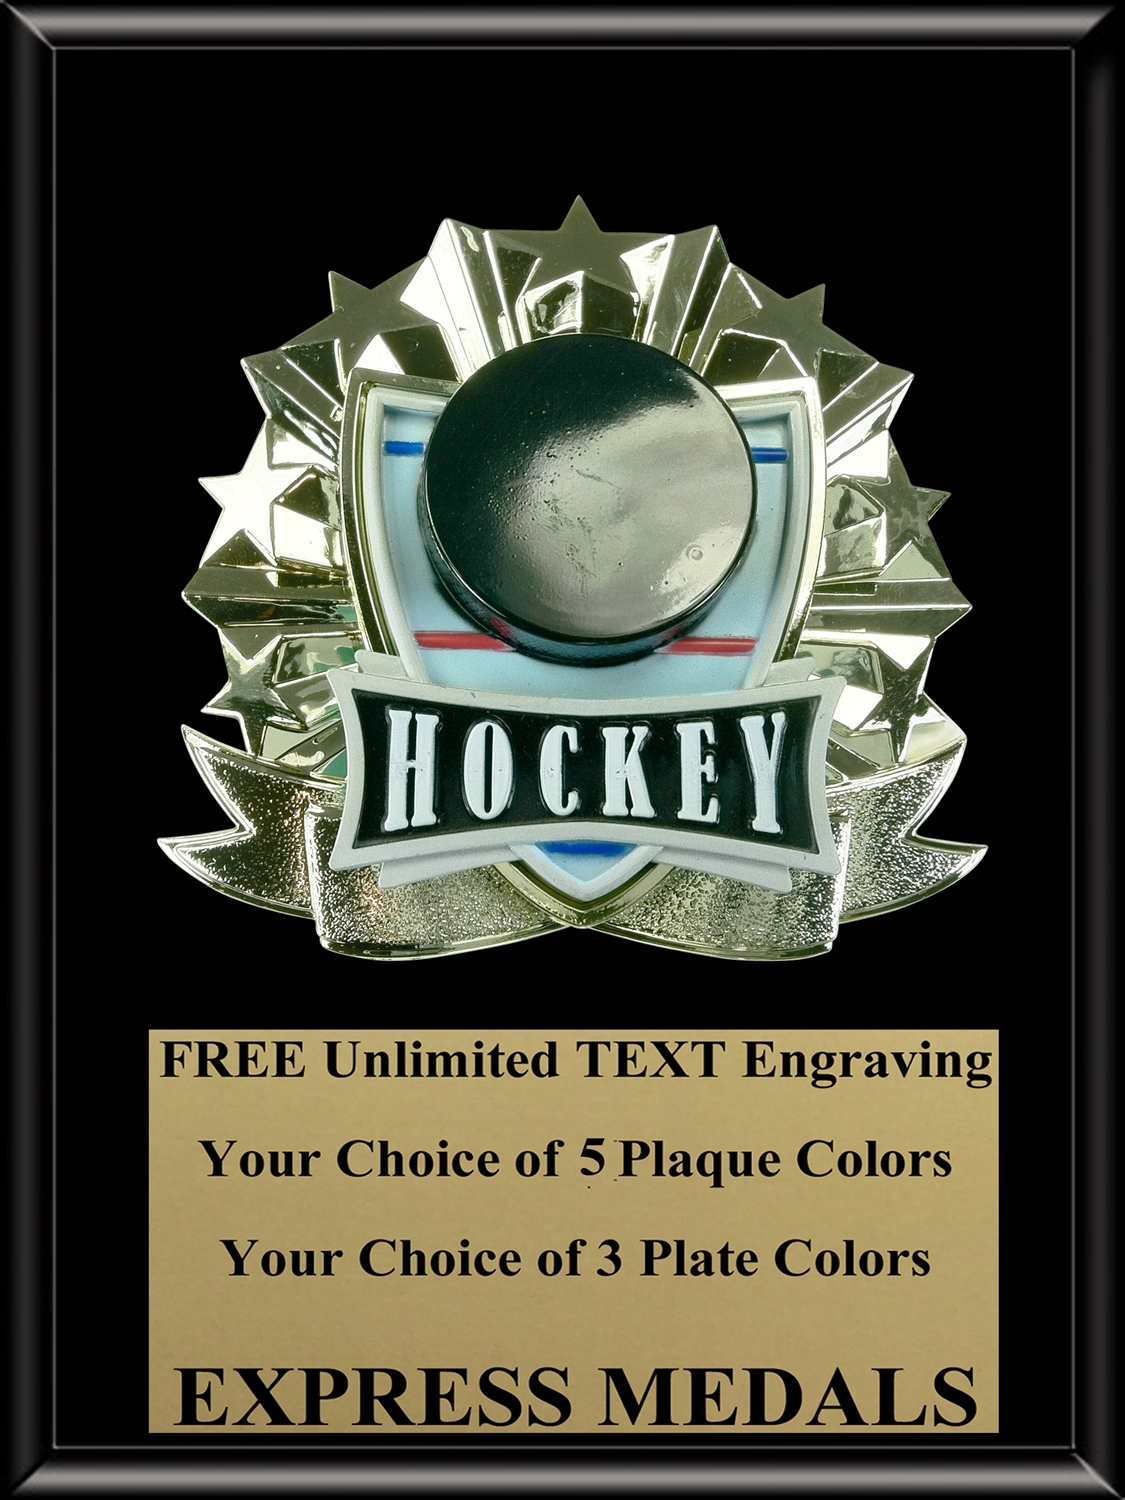 All-Star Hockey Plaque (4 Sizes) (PM1270)